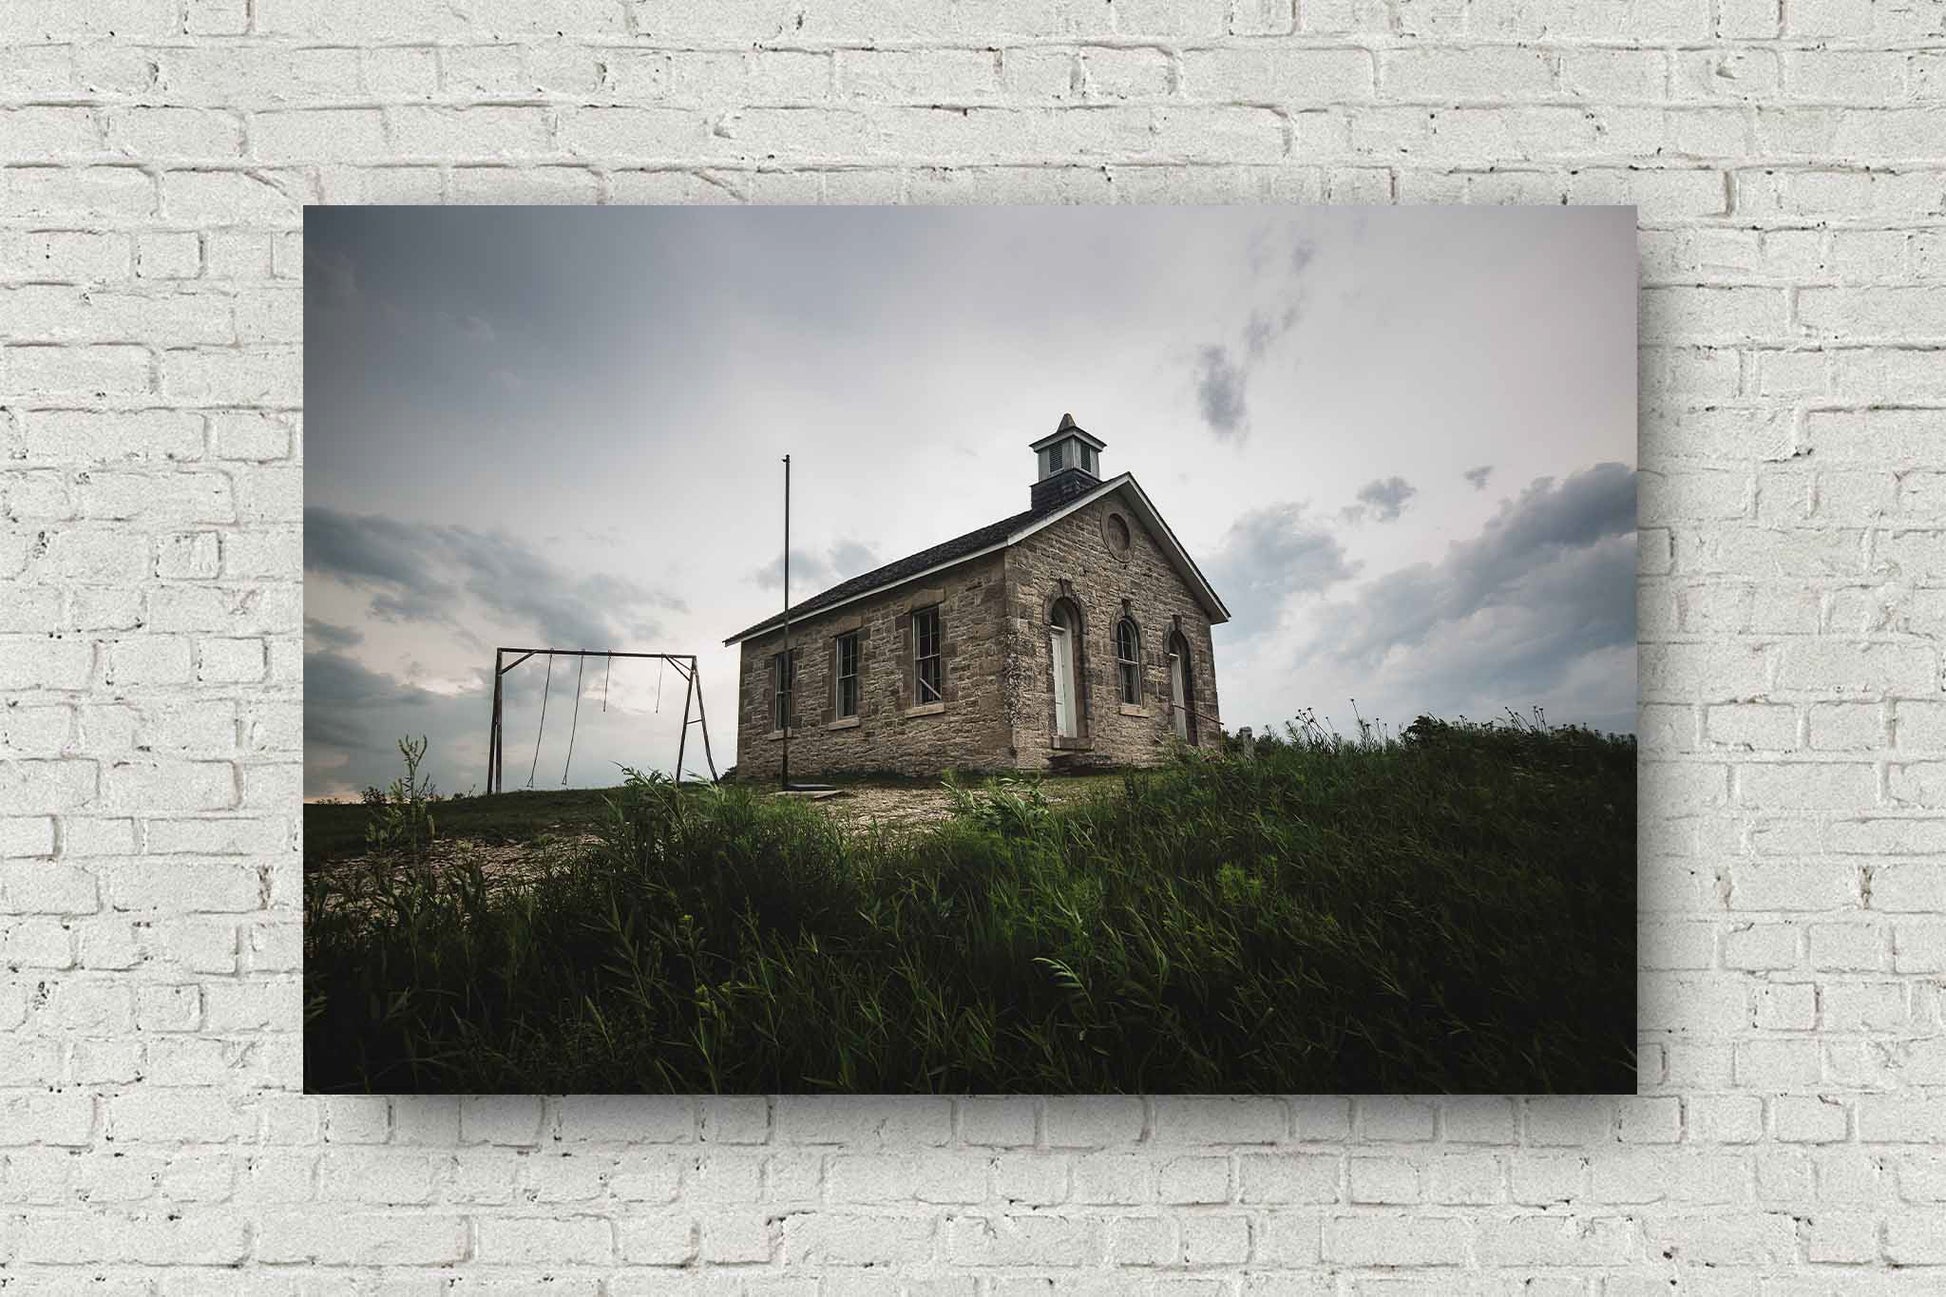 Abandoned metal print wall art of Lower Fox Creek School on a stormy summer day on the Tallgrass Prairie in the Flint Hills of Kansas by Sean Ramsey of Southern Plains Photography.